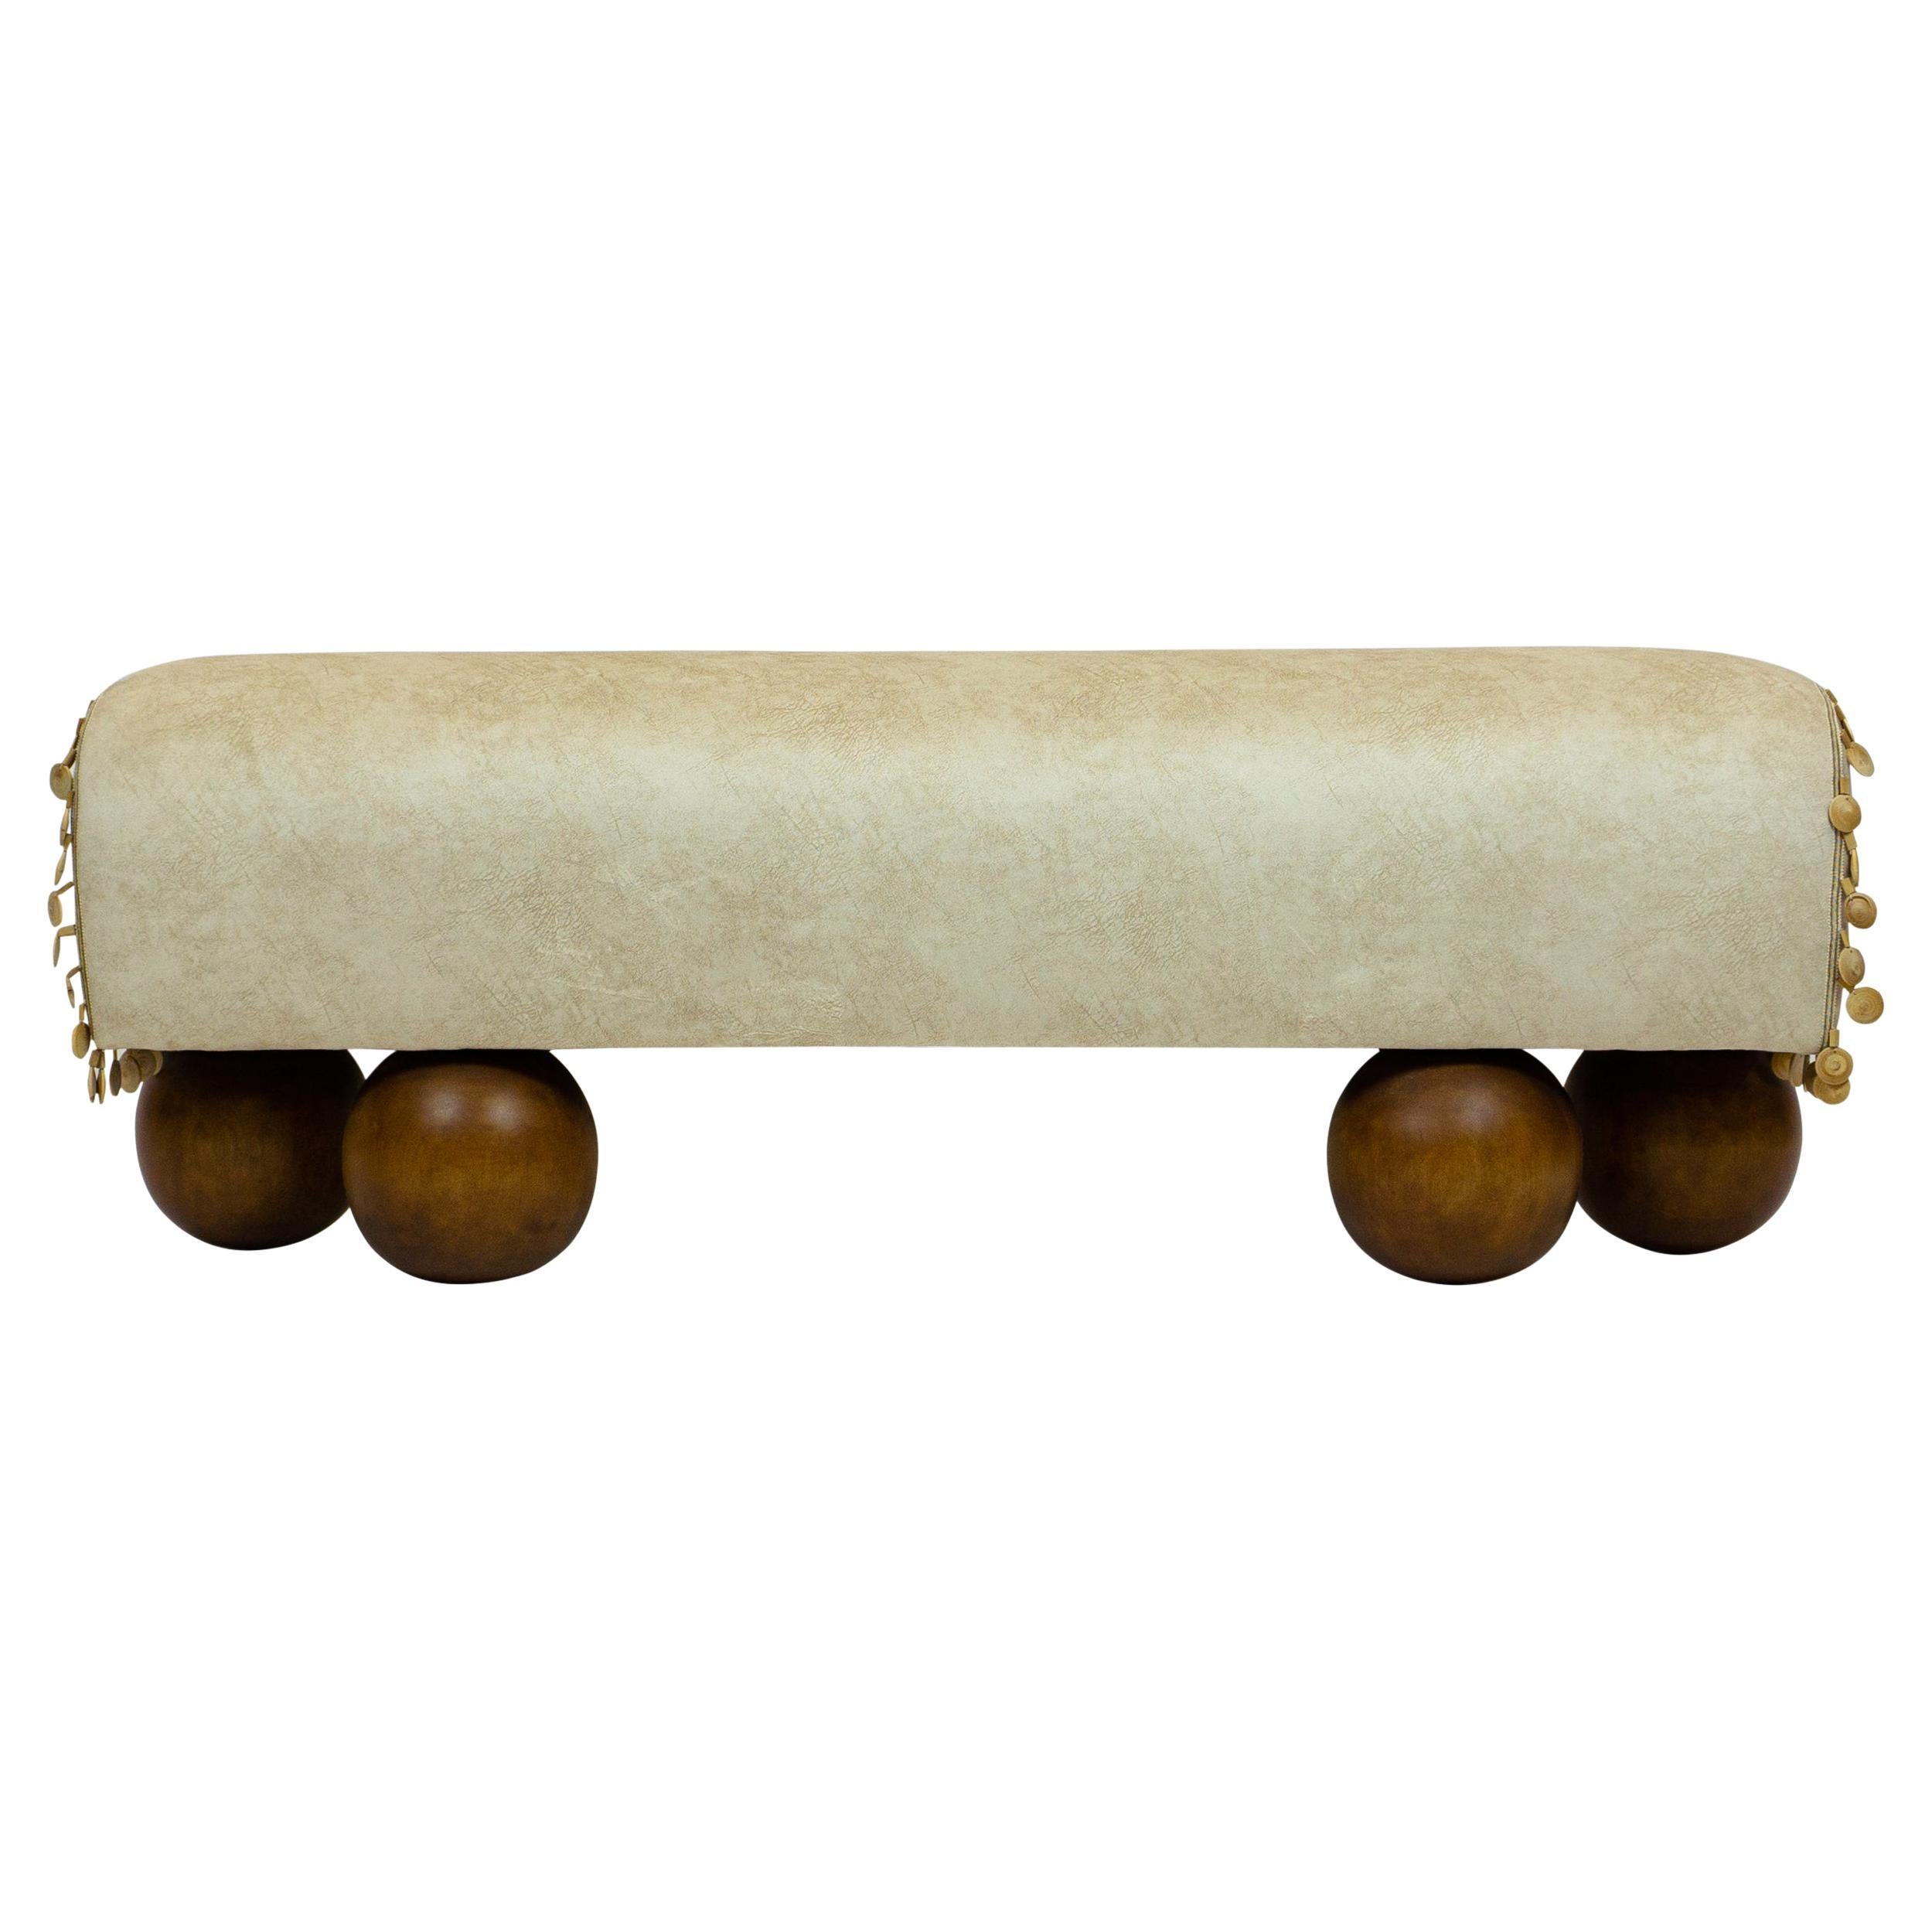 Ball Foot Bench with Saddle Shaped Seat - Customizable